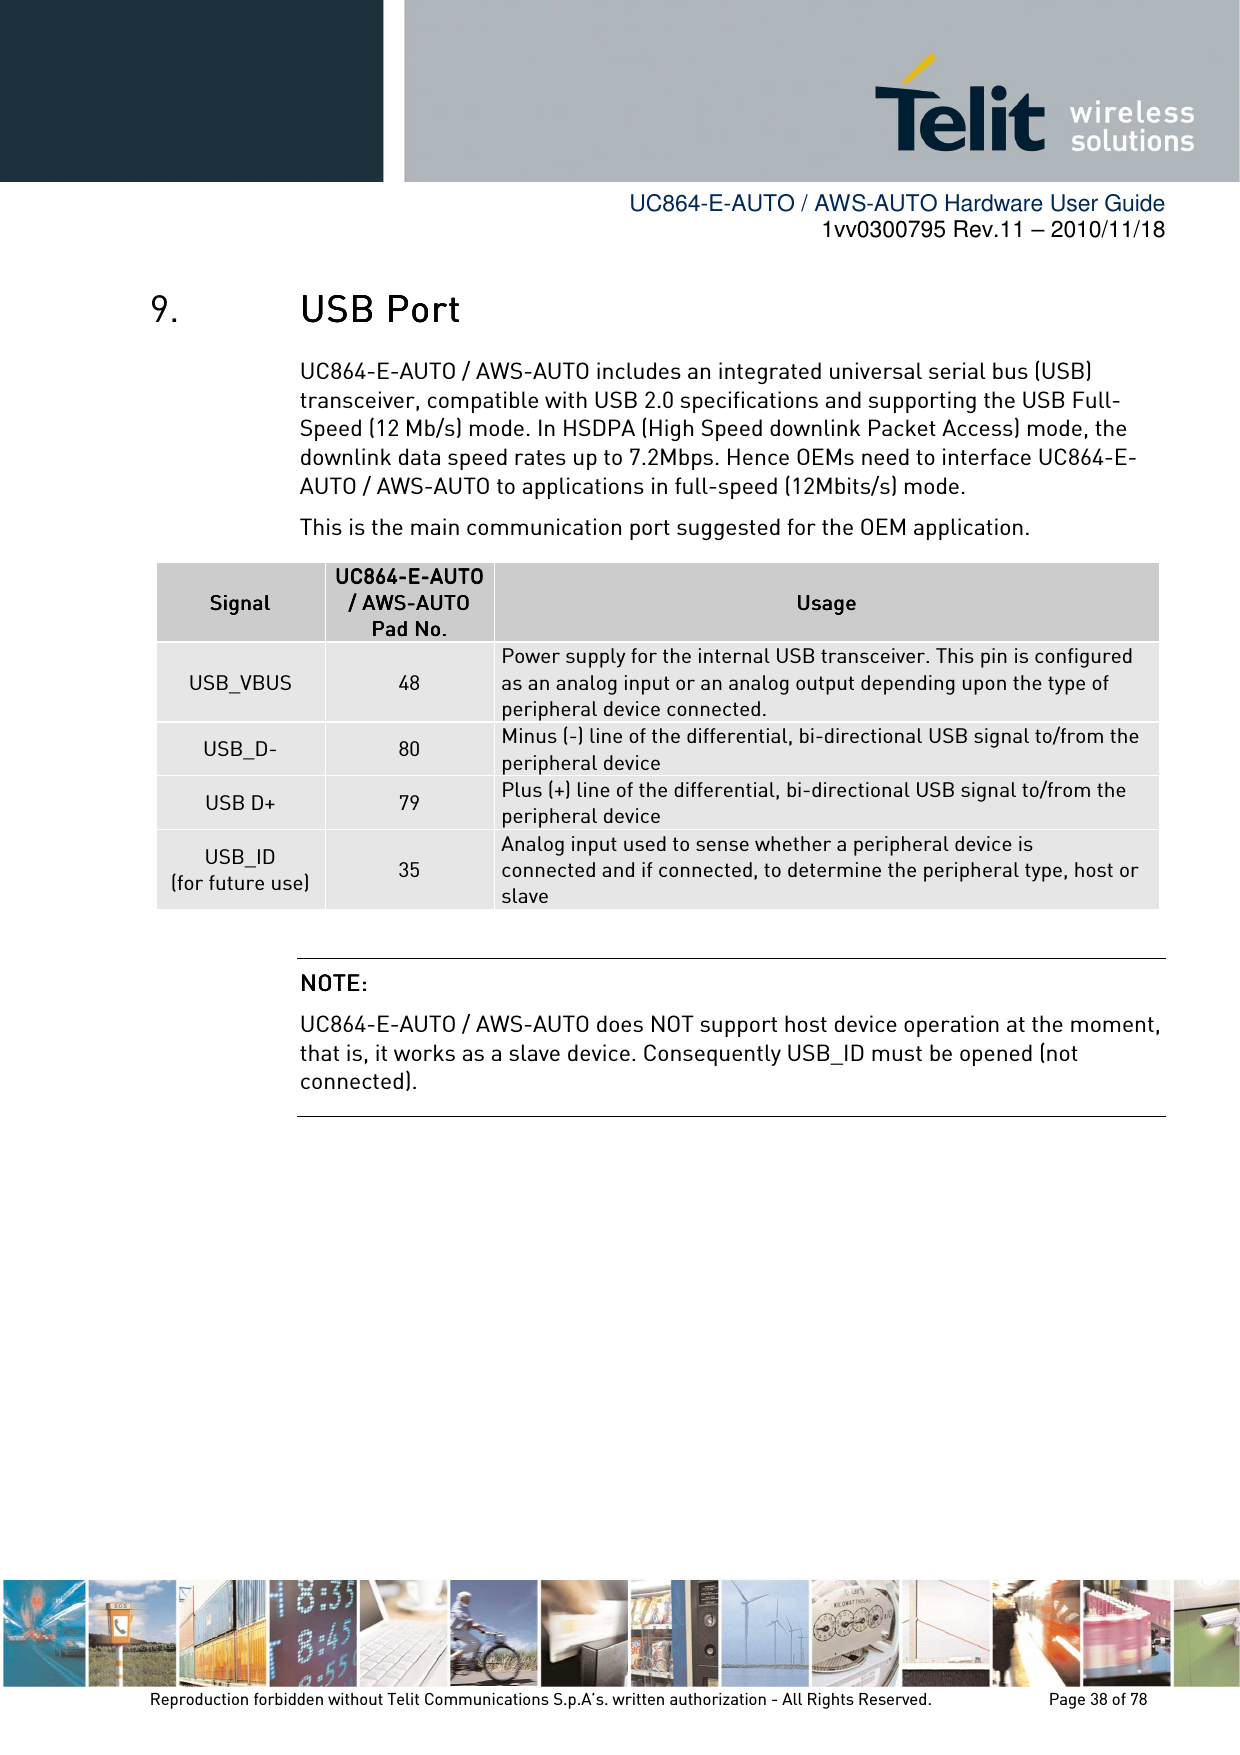        UC864-E-AUTO / AWS-AUTO Hardware User Guide 1vv0300795 Rev.11 – 2010/11/18     Reproduction forbidden without Telit Communications S.p.A’s. written authorization - All Rights Reserved.    Page 38 of 78  9. USB PortUSB PortUSB PortUSB Port    UC864-E-AUTO / AWS-AUTO includes an integrated universal serial bus (USB) transceiver, compatible with USB 2.0 specifications and supporting the USB Full-Speed (12 Mb/s) mode. In HSDPA (High Speed downlink Packet Access) mode, the downlink data speed rates up to 7.2Mbps. Hence OEMs need to interface UC864-E-AUTO / AWS-AUTO to applications in full-speed (12Mbits/s) mode. This is the main communication port suggested for the OEM application.           SignalSignalSignalSignal    UC864UC864UC864UC864----EEEE----AUTOAUTOAUTOAUTO    / AWS/ AWS/ AWS/ AWS----AUTOAUTOAUTOAUTO    Pad No.Pad No.Pad No.Pad No.    UsageUsageUsageUsage    USB_VBUS  48 Power supply for the internal USB transceiver. This pin is configured as an analog input or an analog output depending upon the type of peripheral device connected. USB_D-  80  Minus (-) line of the differential, bi-directional USB signal to/from the peripheral device USB D+  79  Plus (+) line of the differential, bi-directional USB signal to/from the peripheral device USB_ID (for future use)  35 Analog input used to sense whether a peripheral device is connected and if connected, to determine the peripheral type, host or slave NOTE:NOTE:NOTE:NOTE:  UC864-E-AUTO / AWS-AUTO does NOT support host device operation at the moment, that is, it works as a slave device. Consequently USB_ID must be opened (not connected). 